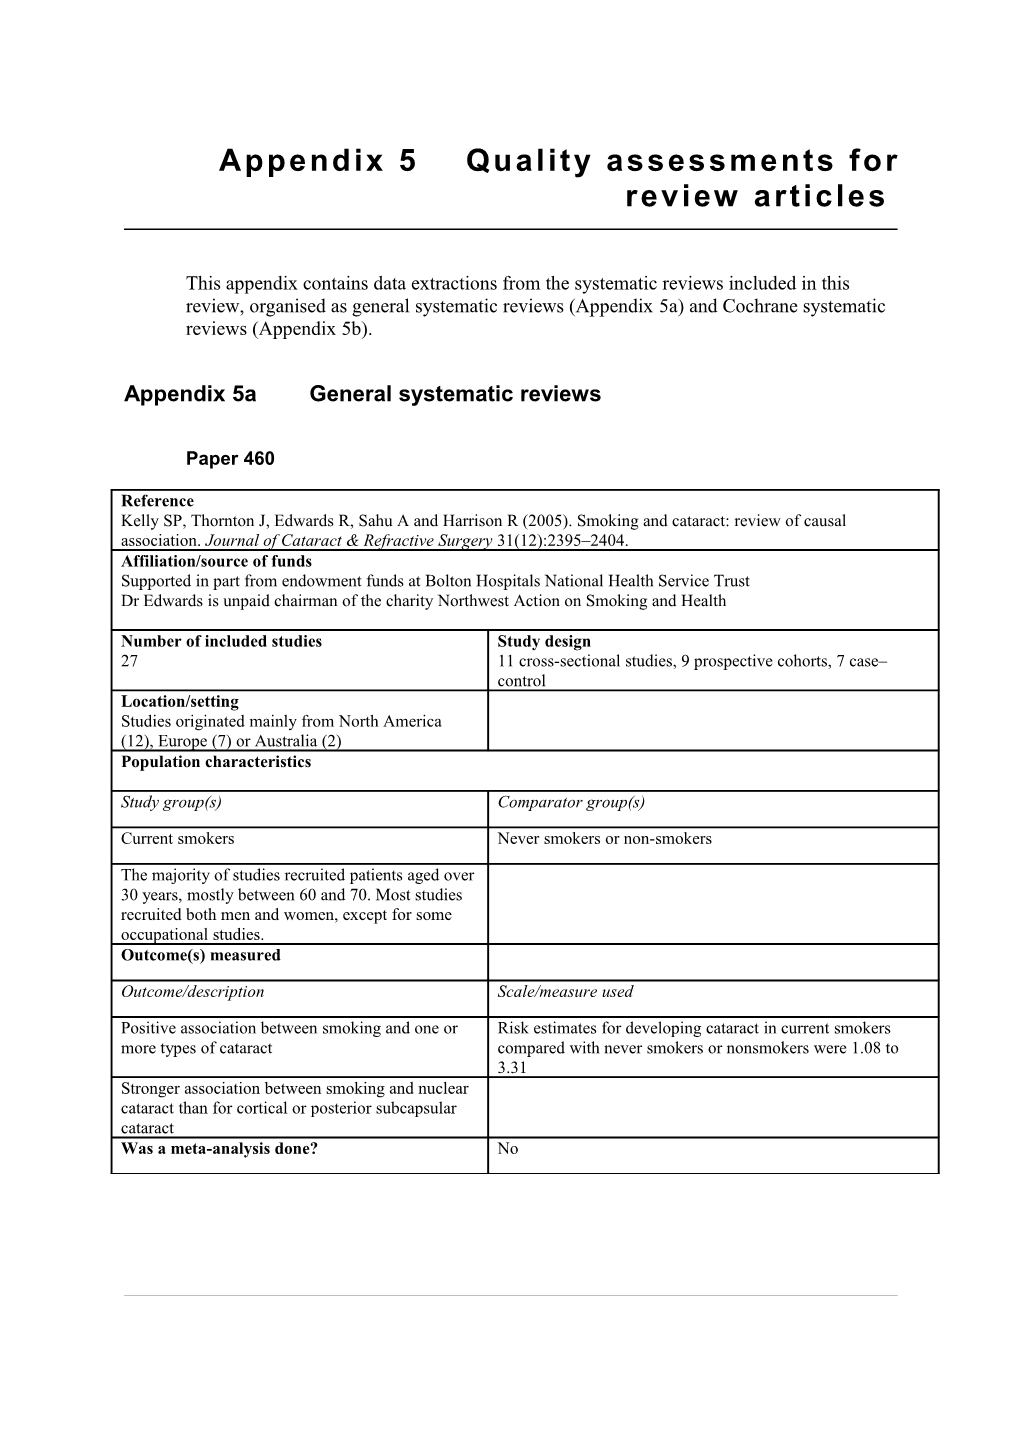 Appendix 5Quality Assessments for Review Articles